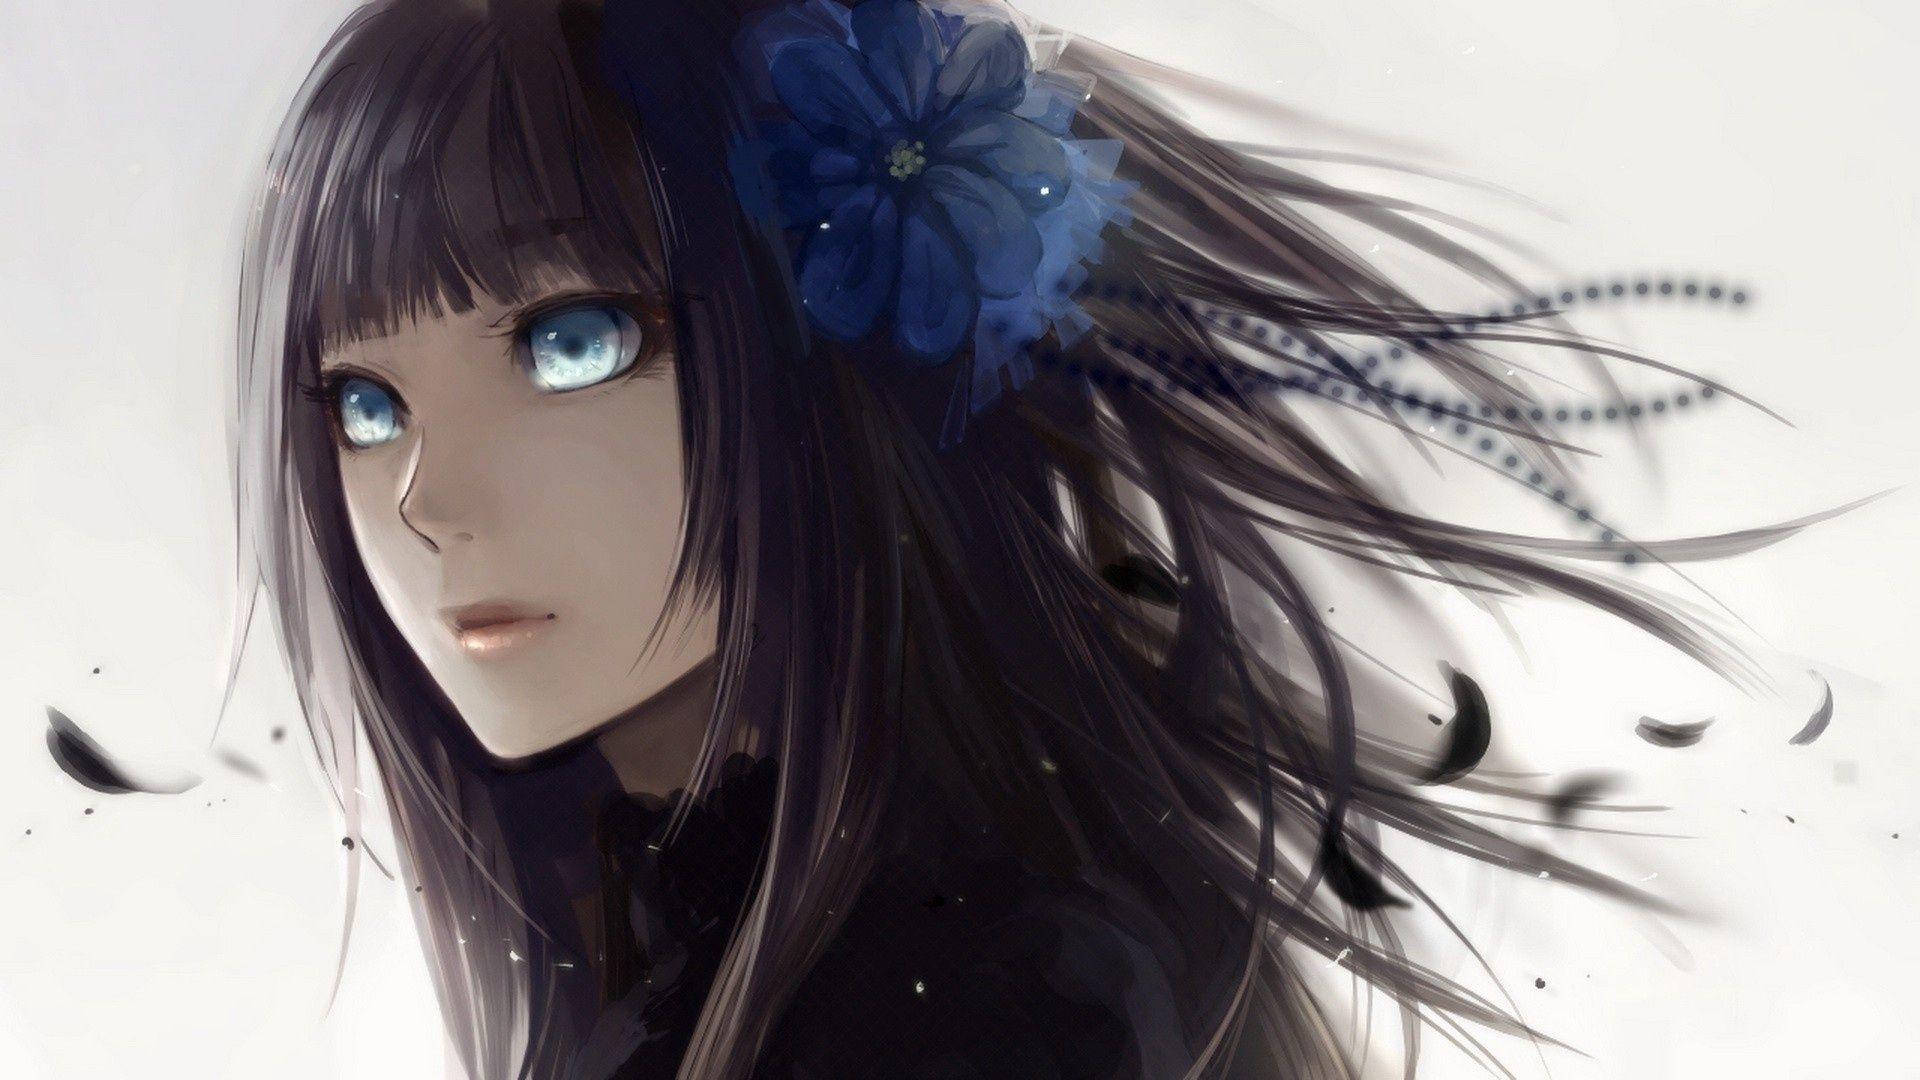 Anime Girl With Black Hair And Blue Eyes Wallpaper